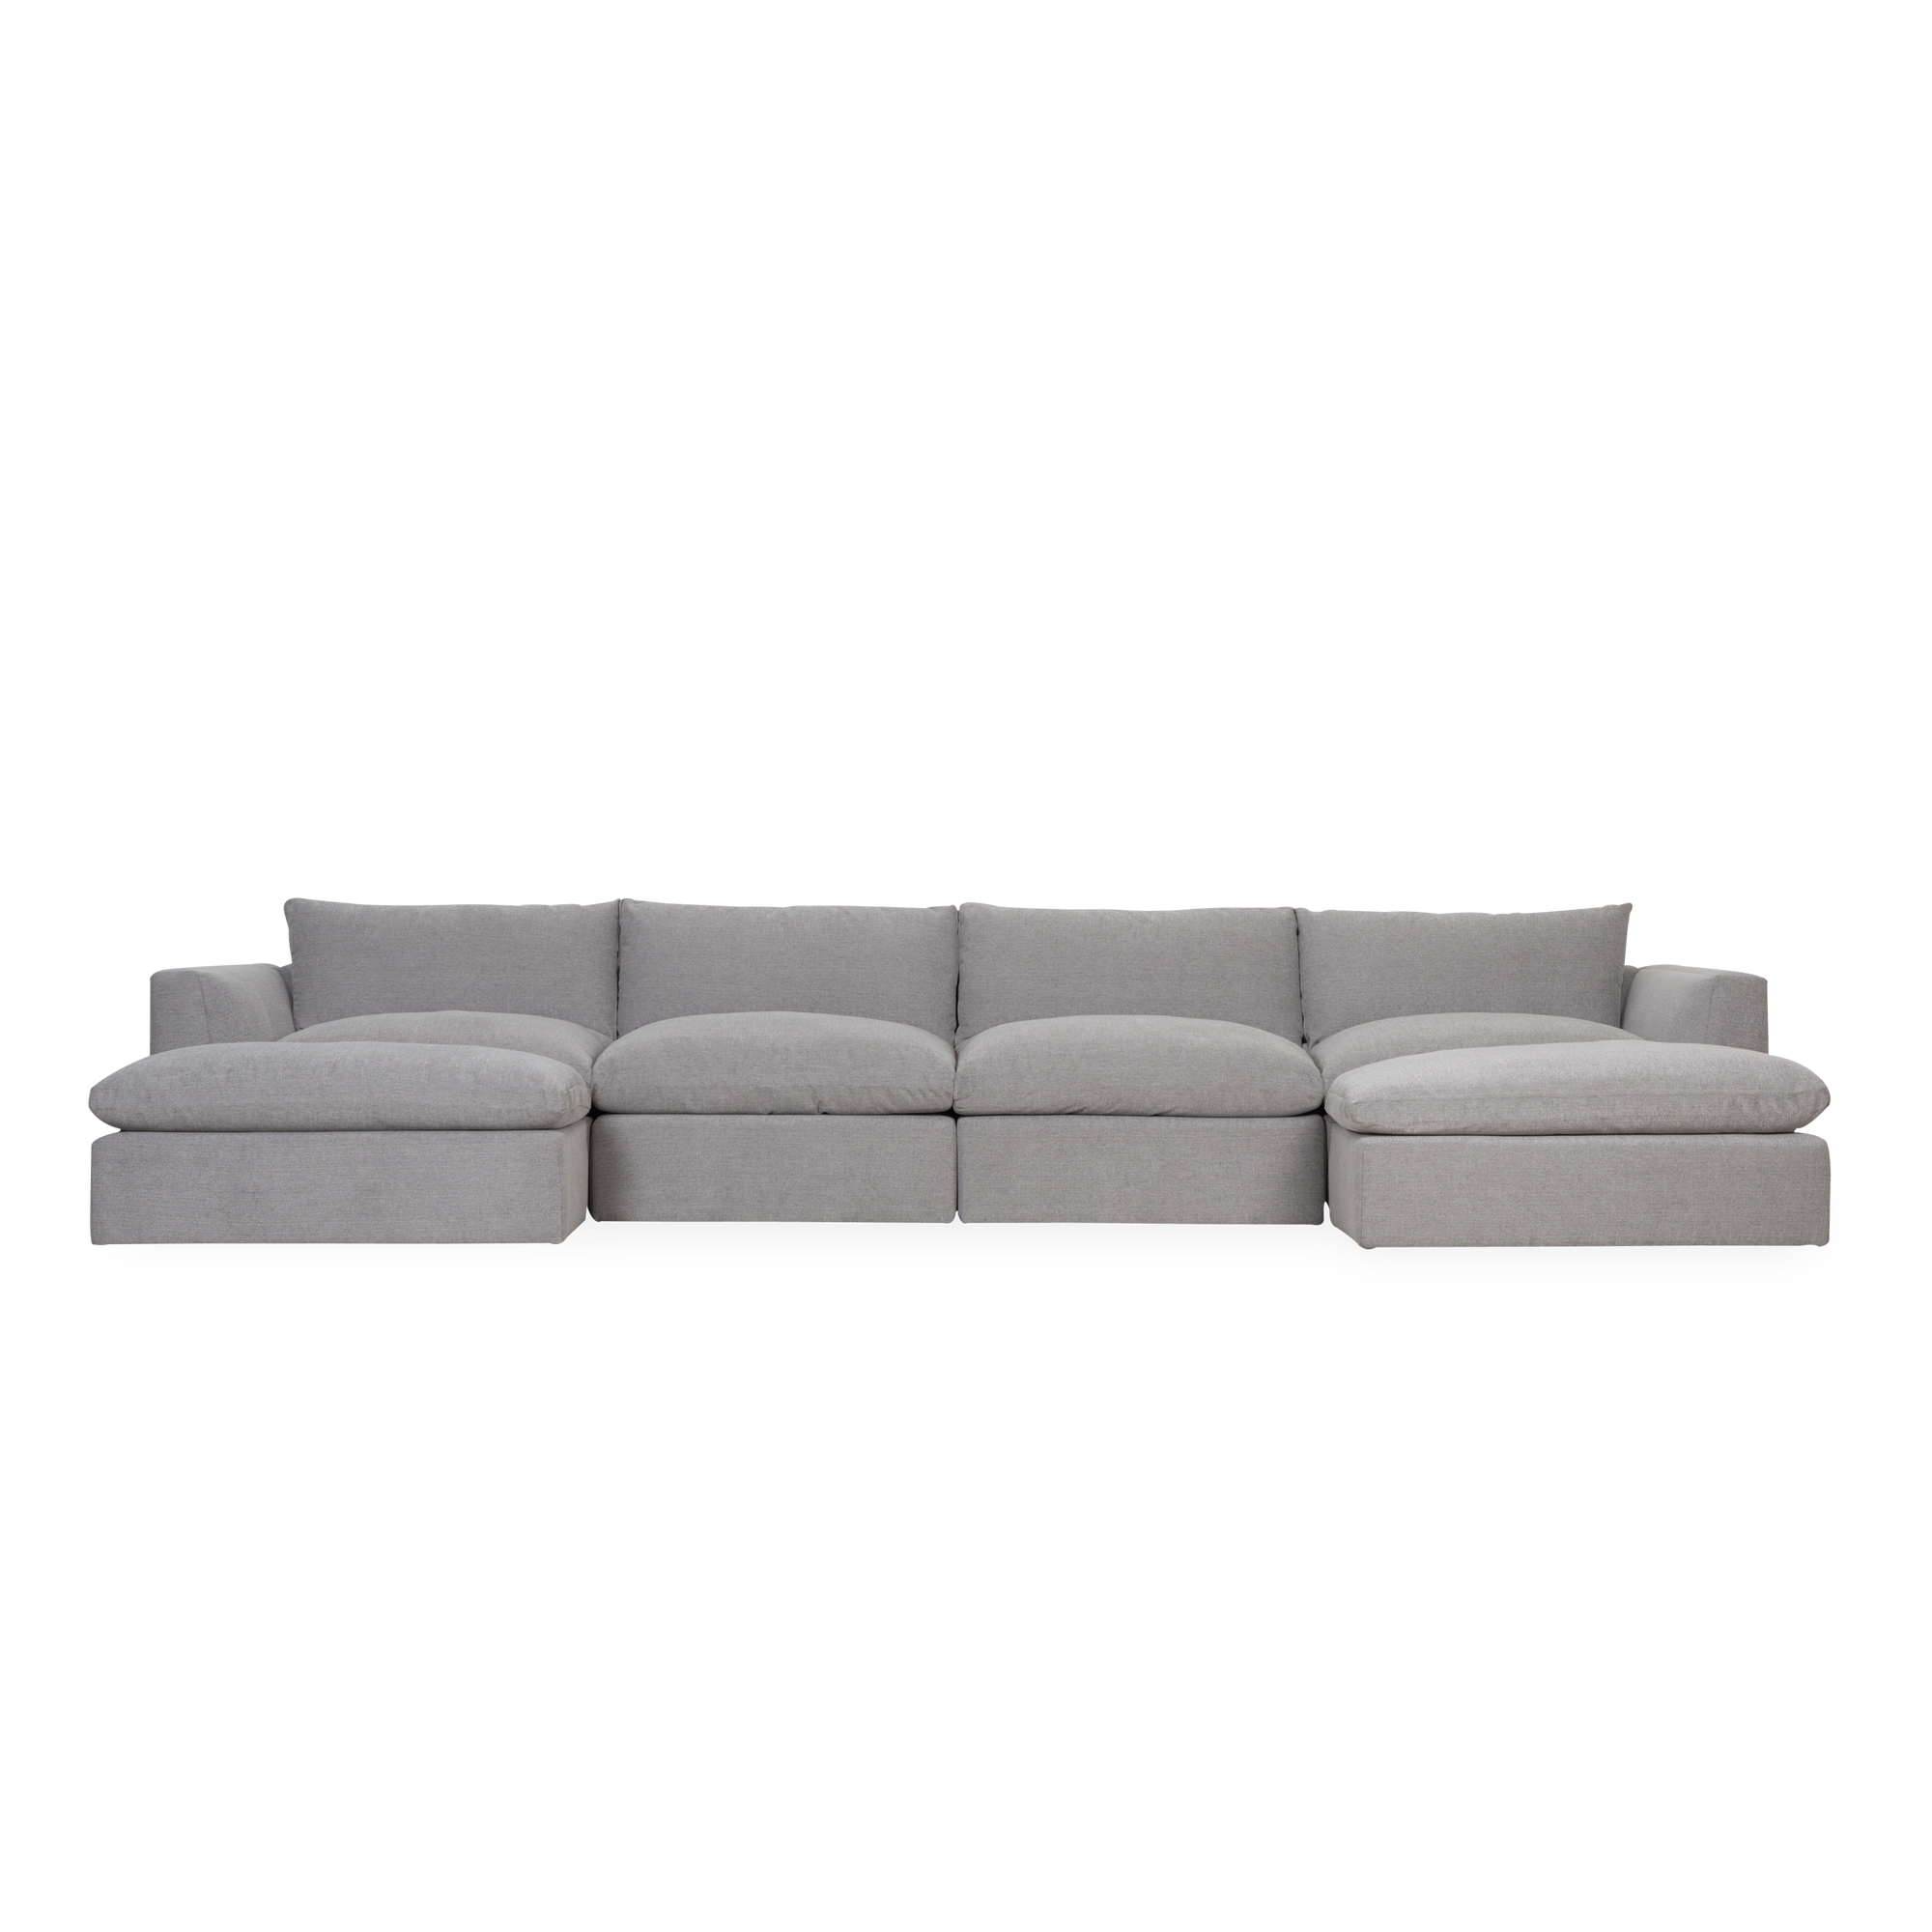 Roost Modular Sectional